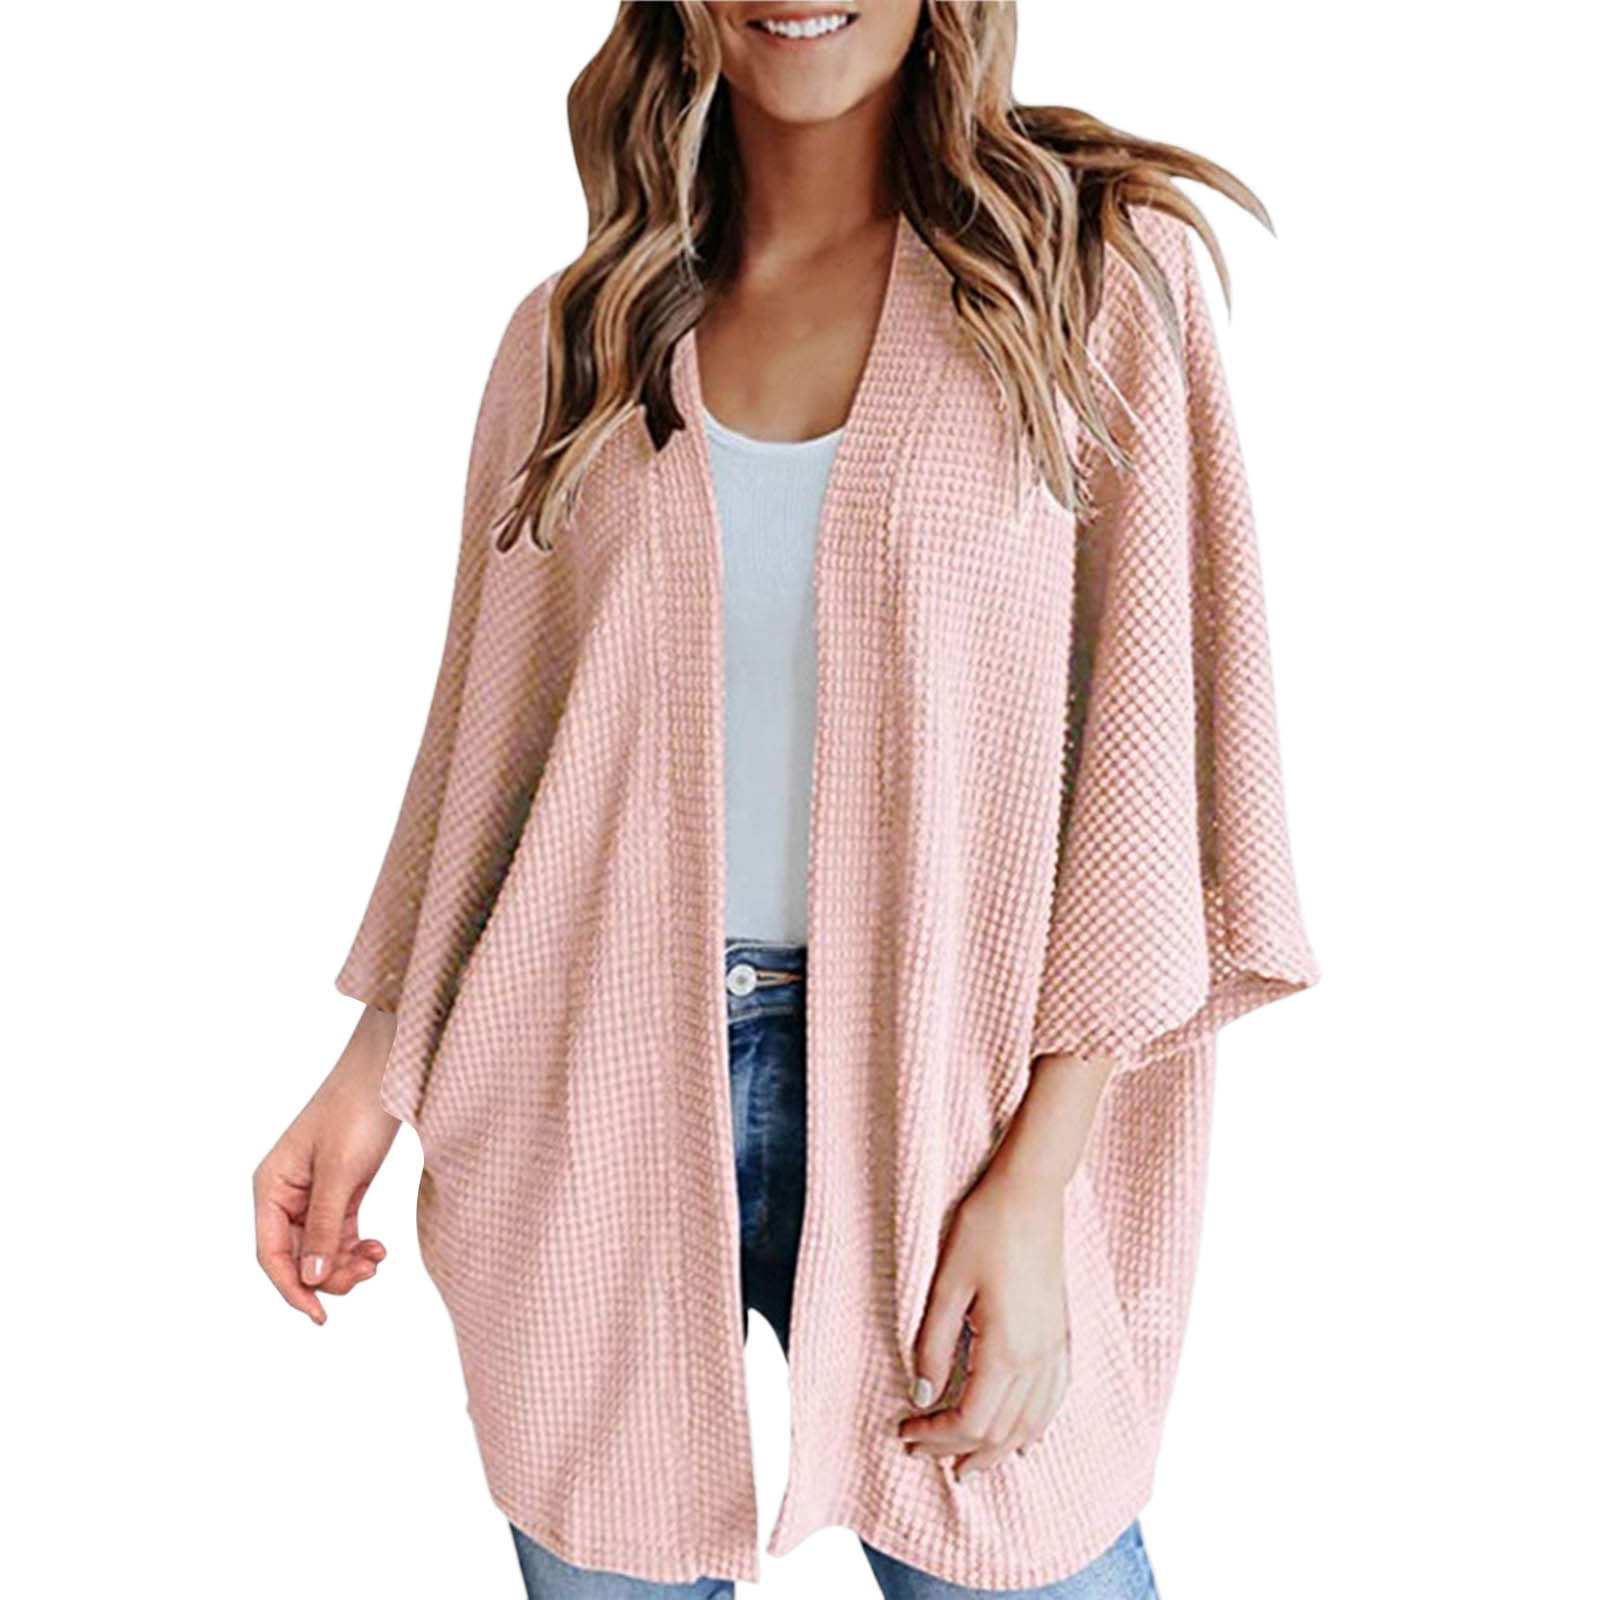 Fluffy Cardigans for Women Womens Cardigan Sweaters Plus Size Halloween  Sweater Short Sleeve Cardigans for Women 1 Items one Dollar Items only 1.00